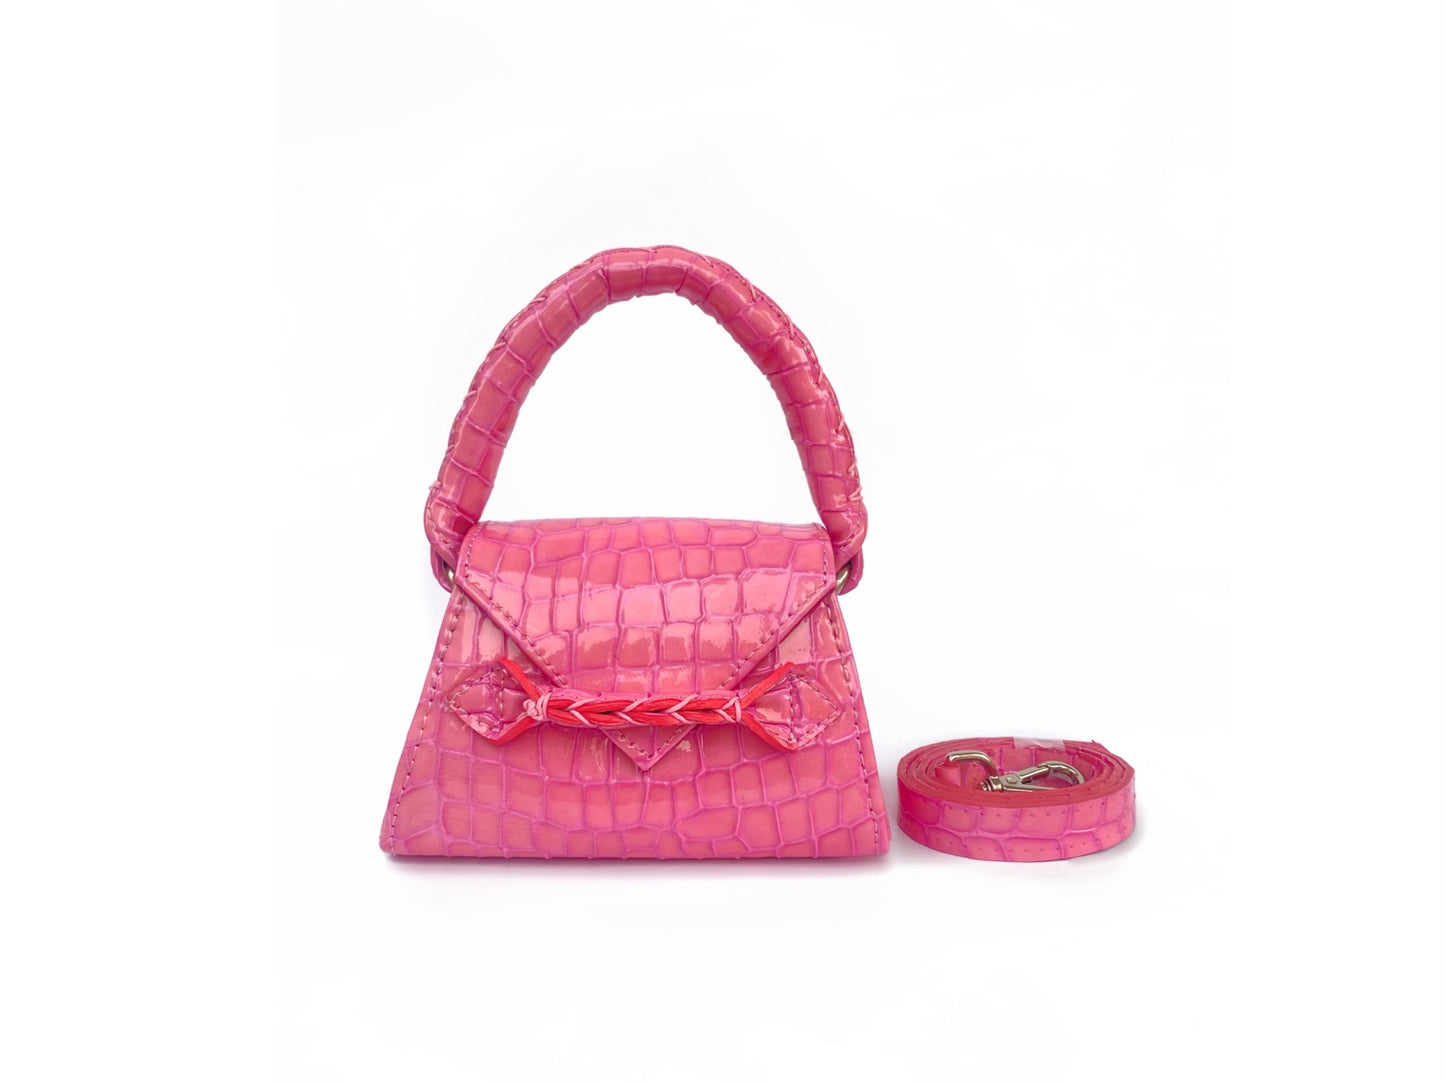 PINK PATENT CROC MICRO ESE TOP HANDLE